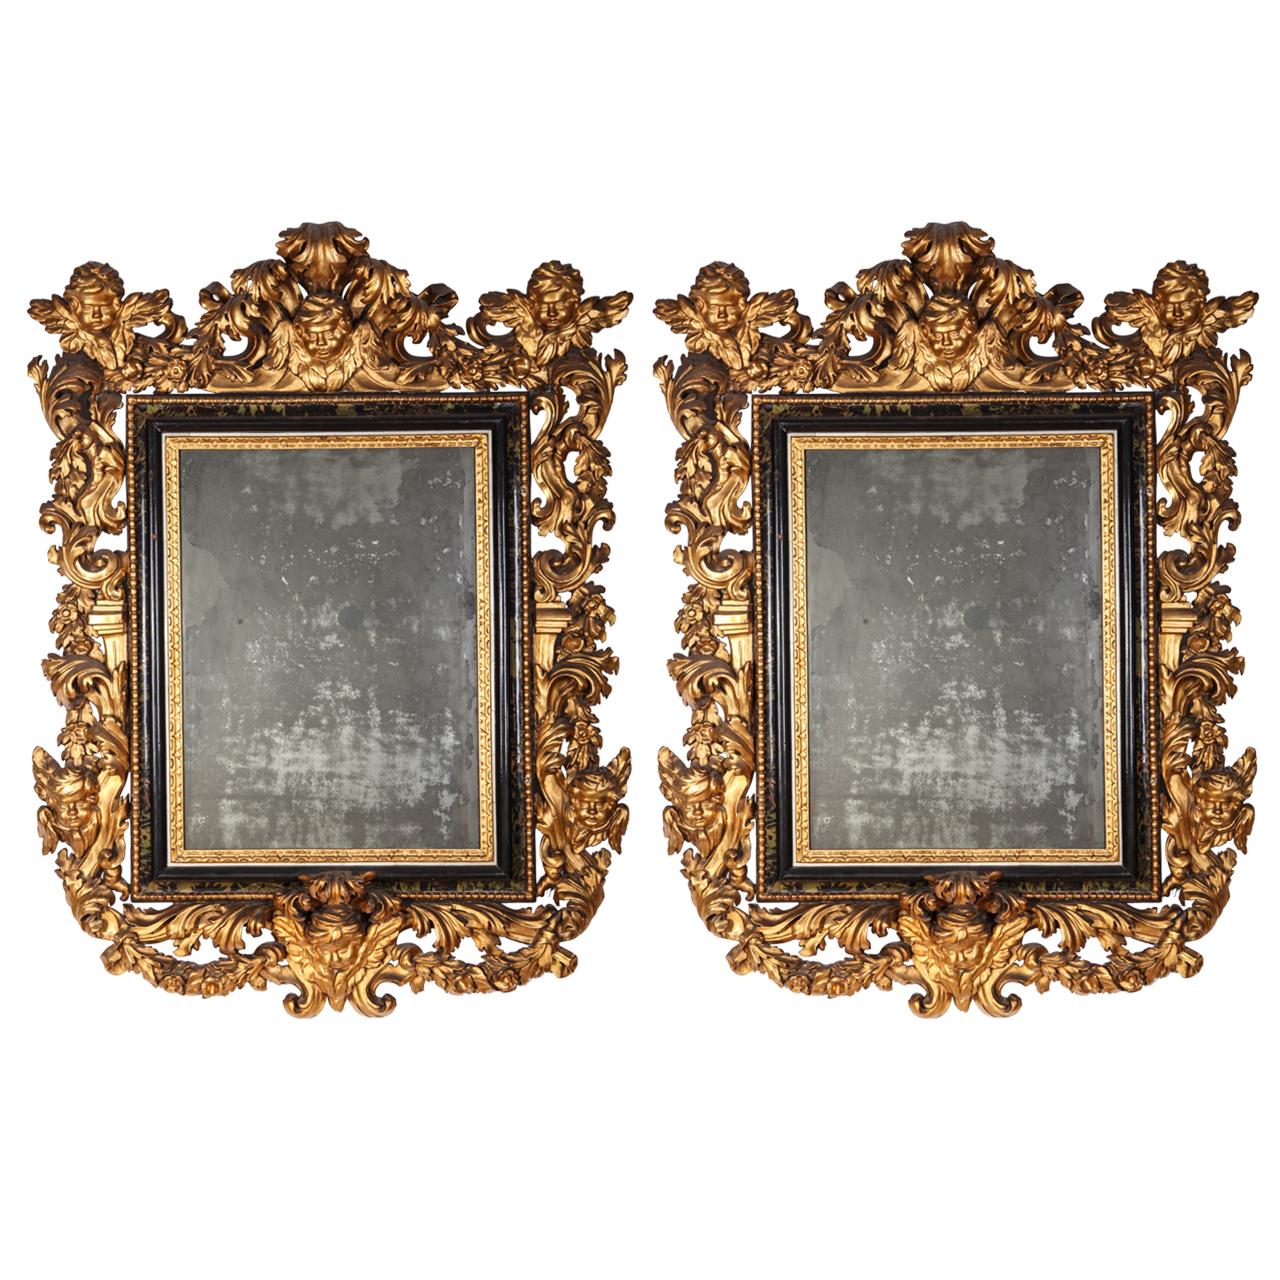 Pair of Important Italian 17th Century Giltwood Baroque Mirrors, 1680 For Sale 8